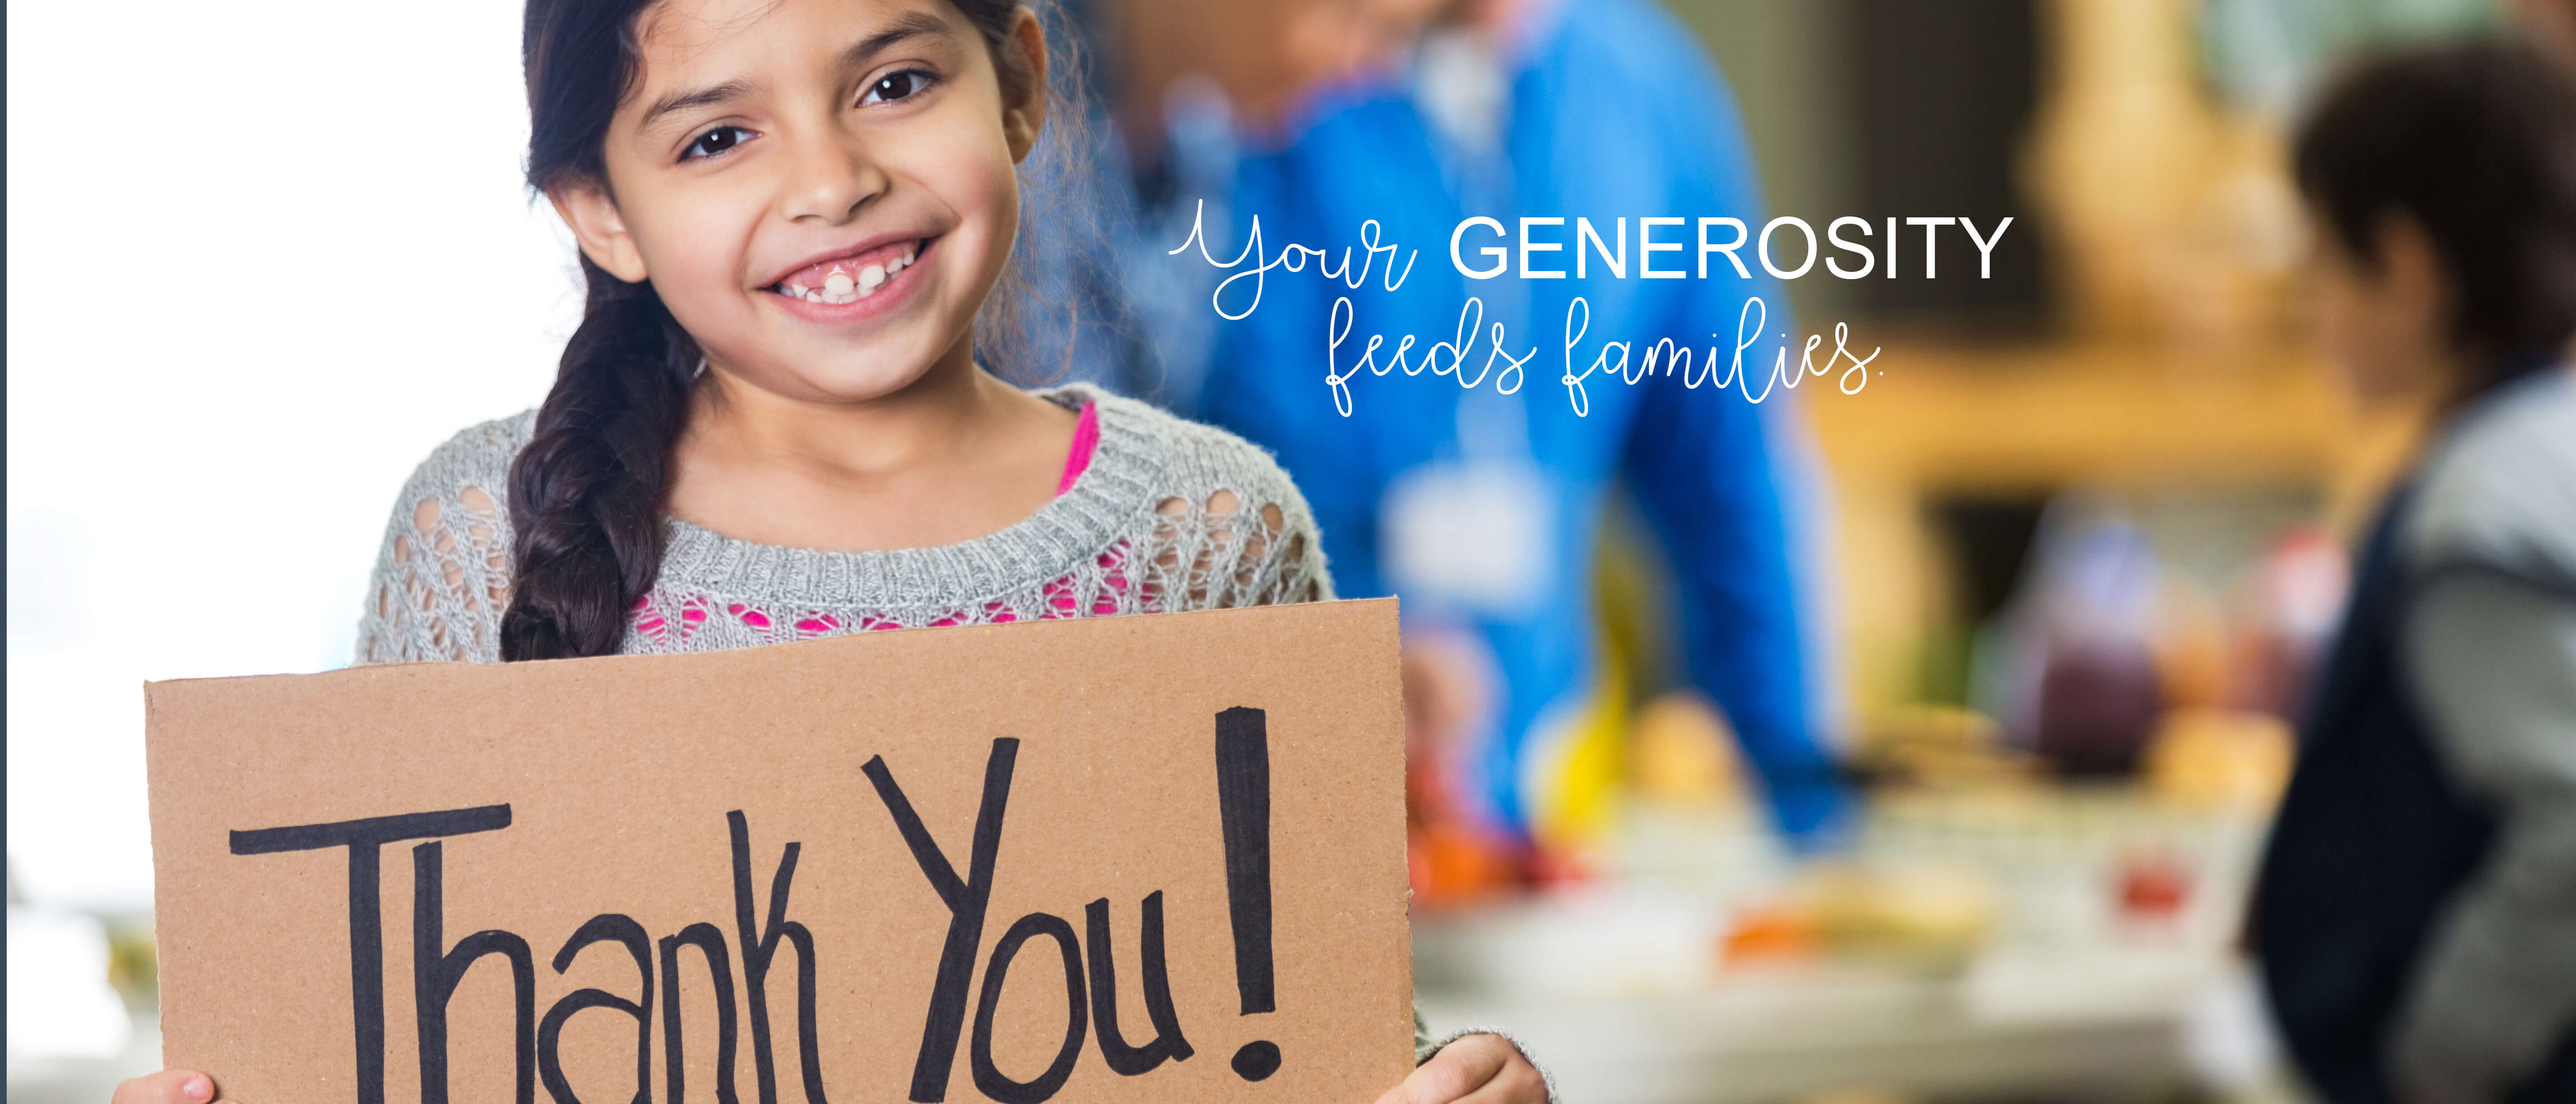 A Girl holding THANK YOU sign at food bank